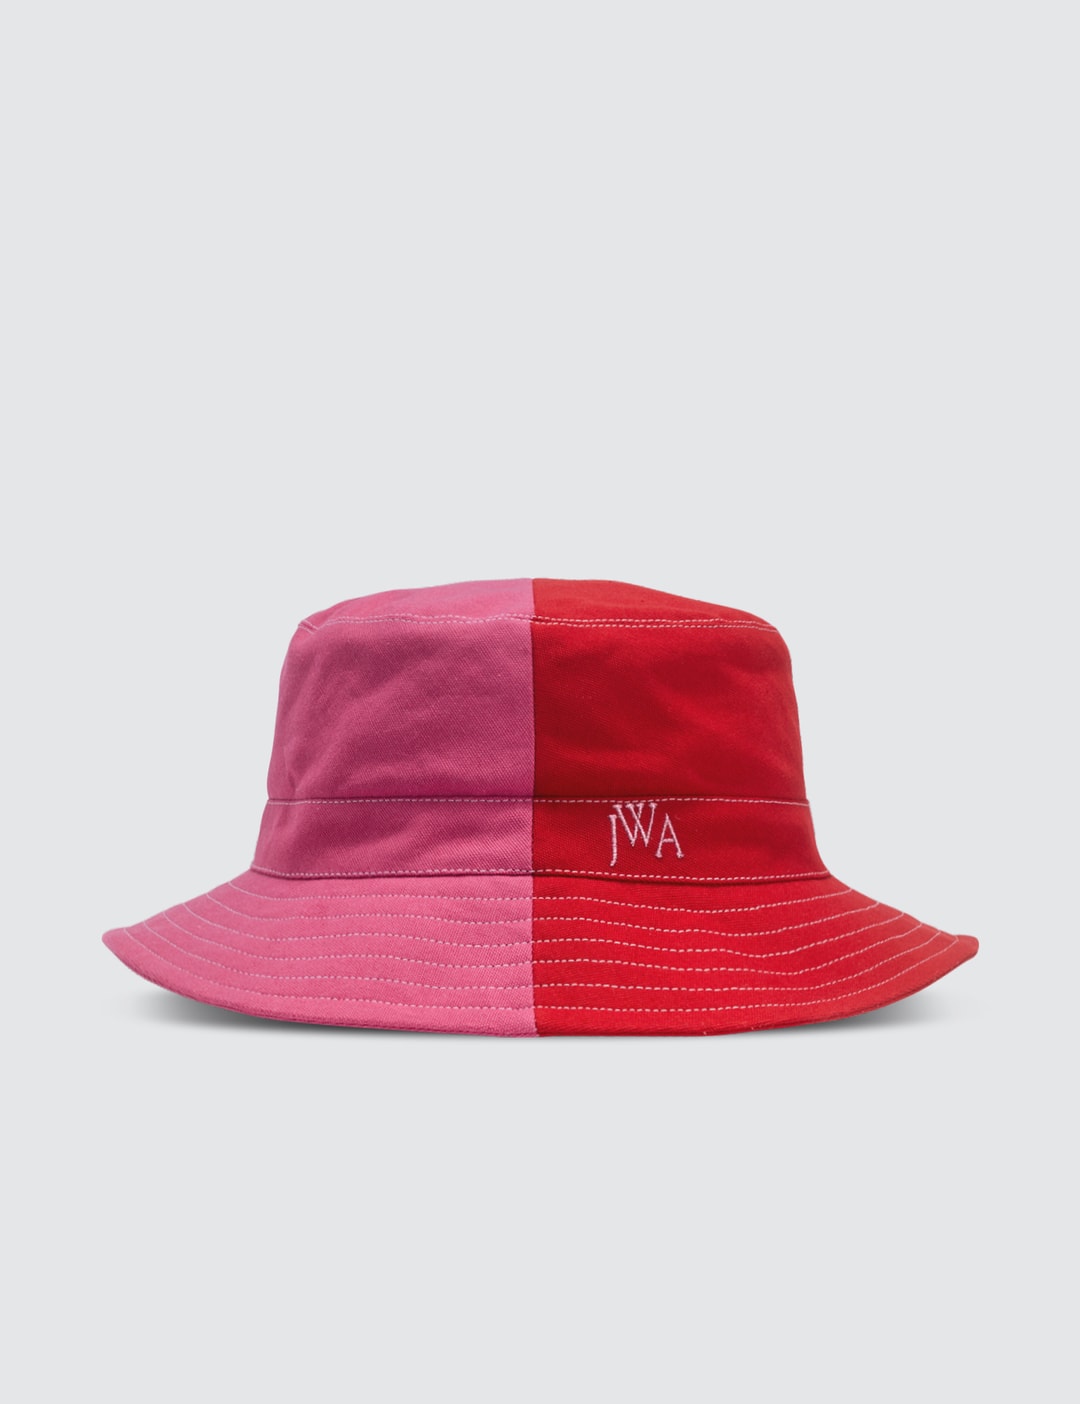 JW Anderson - Red & Pink Color-blocked Bucket Hat | HBX - Globally ...